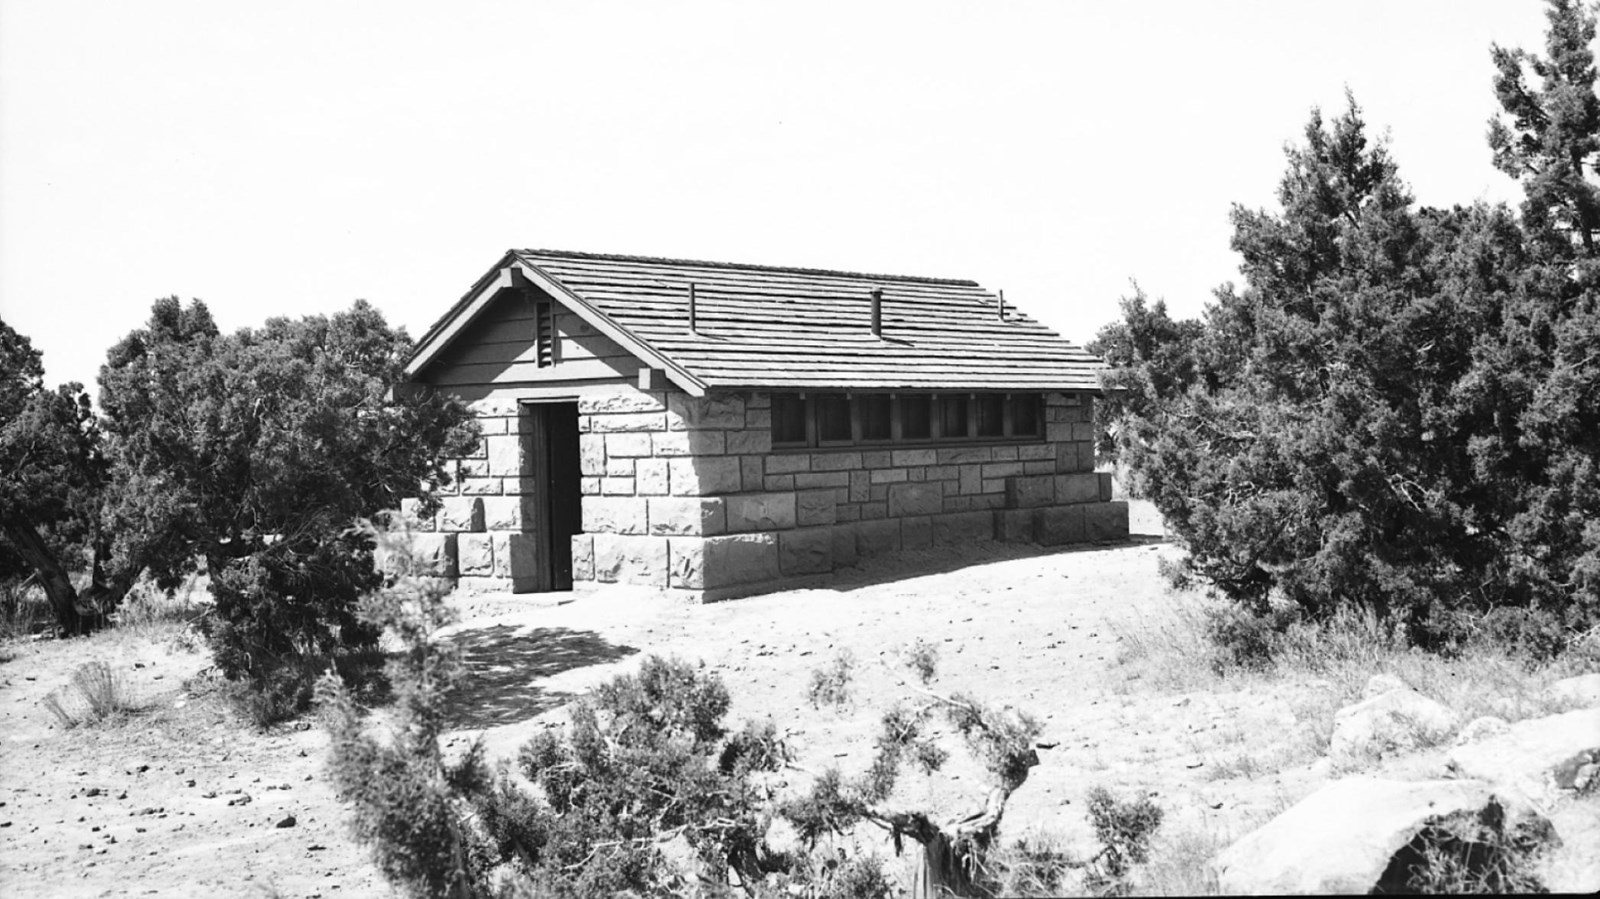 Black and White Image of rectangular building made of large sandstone blocks with a shingle roof.